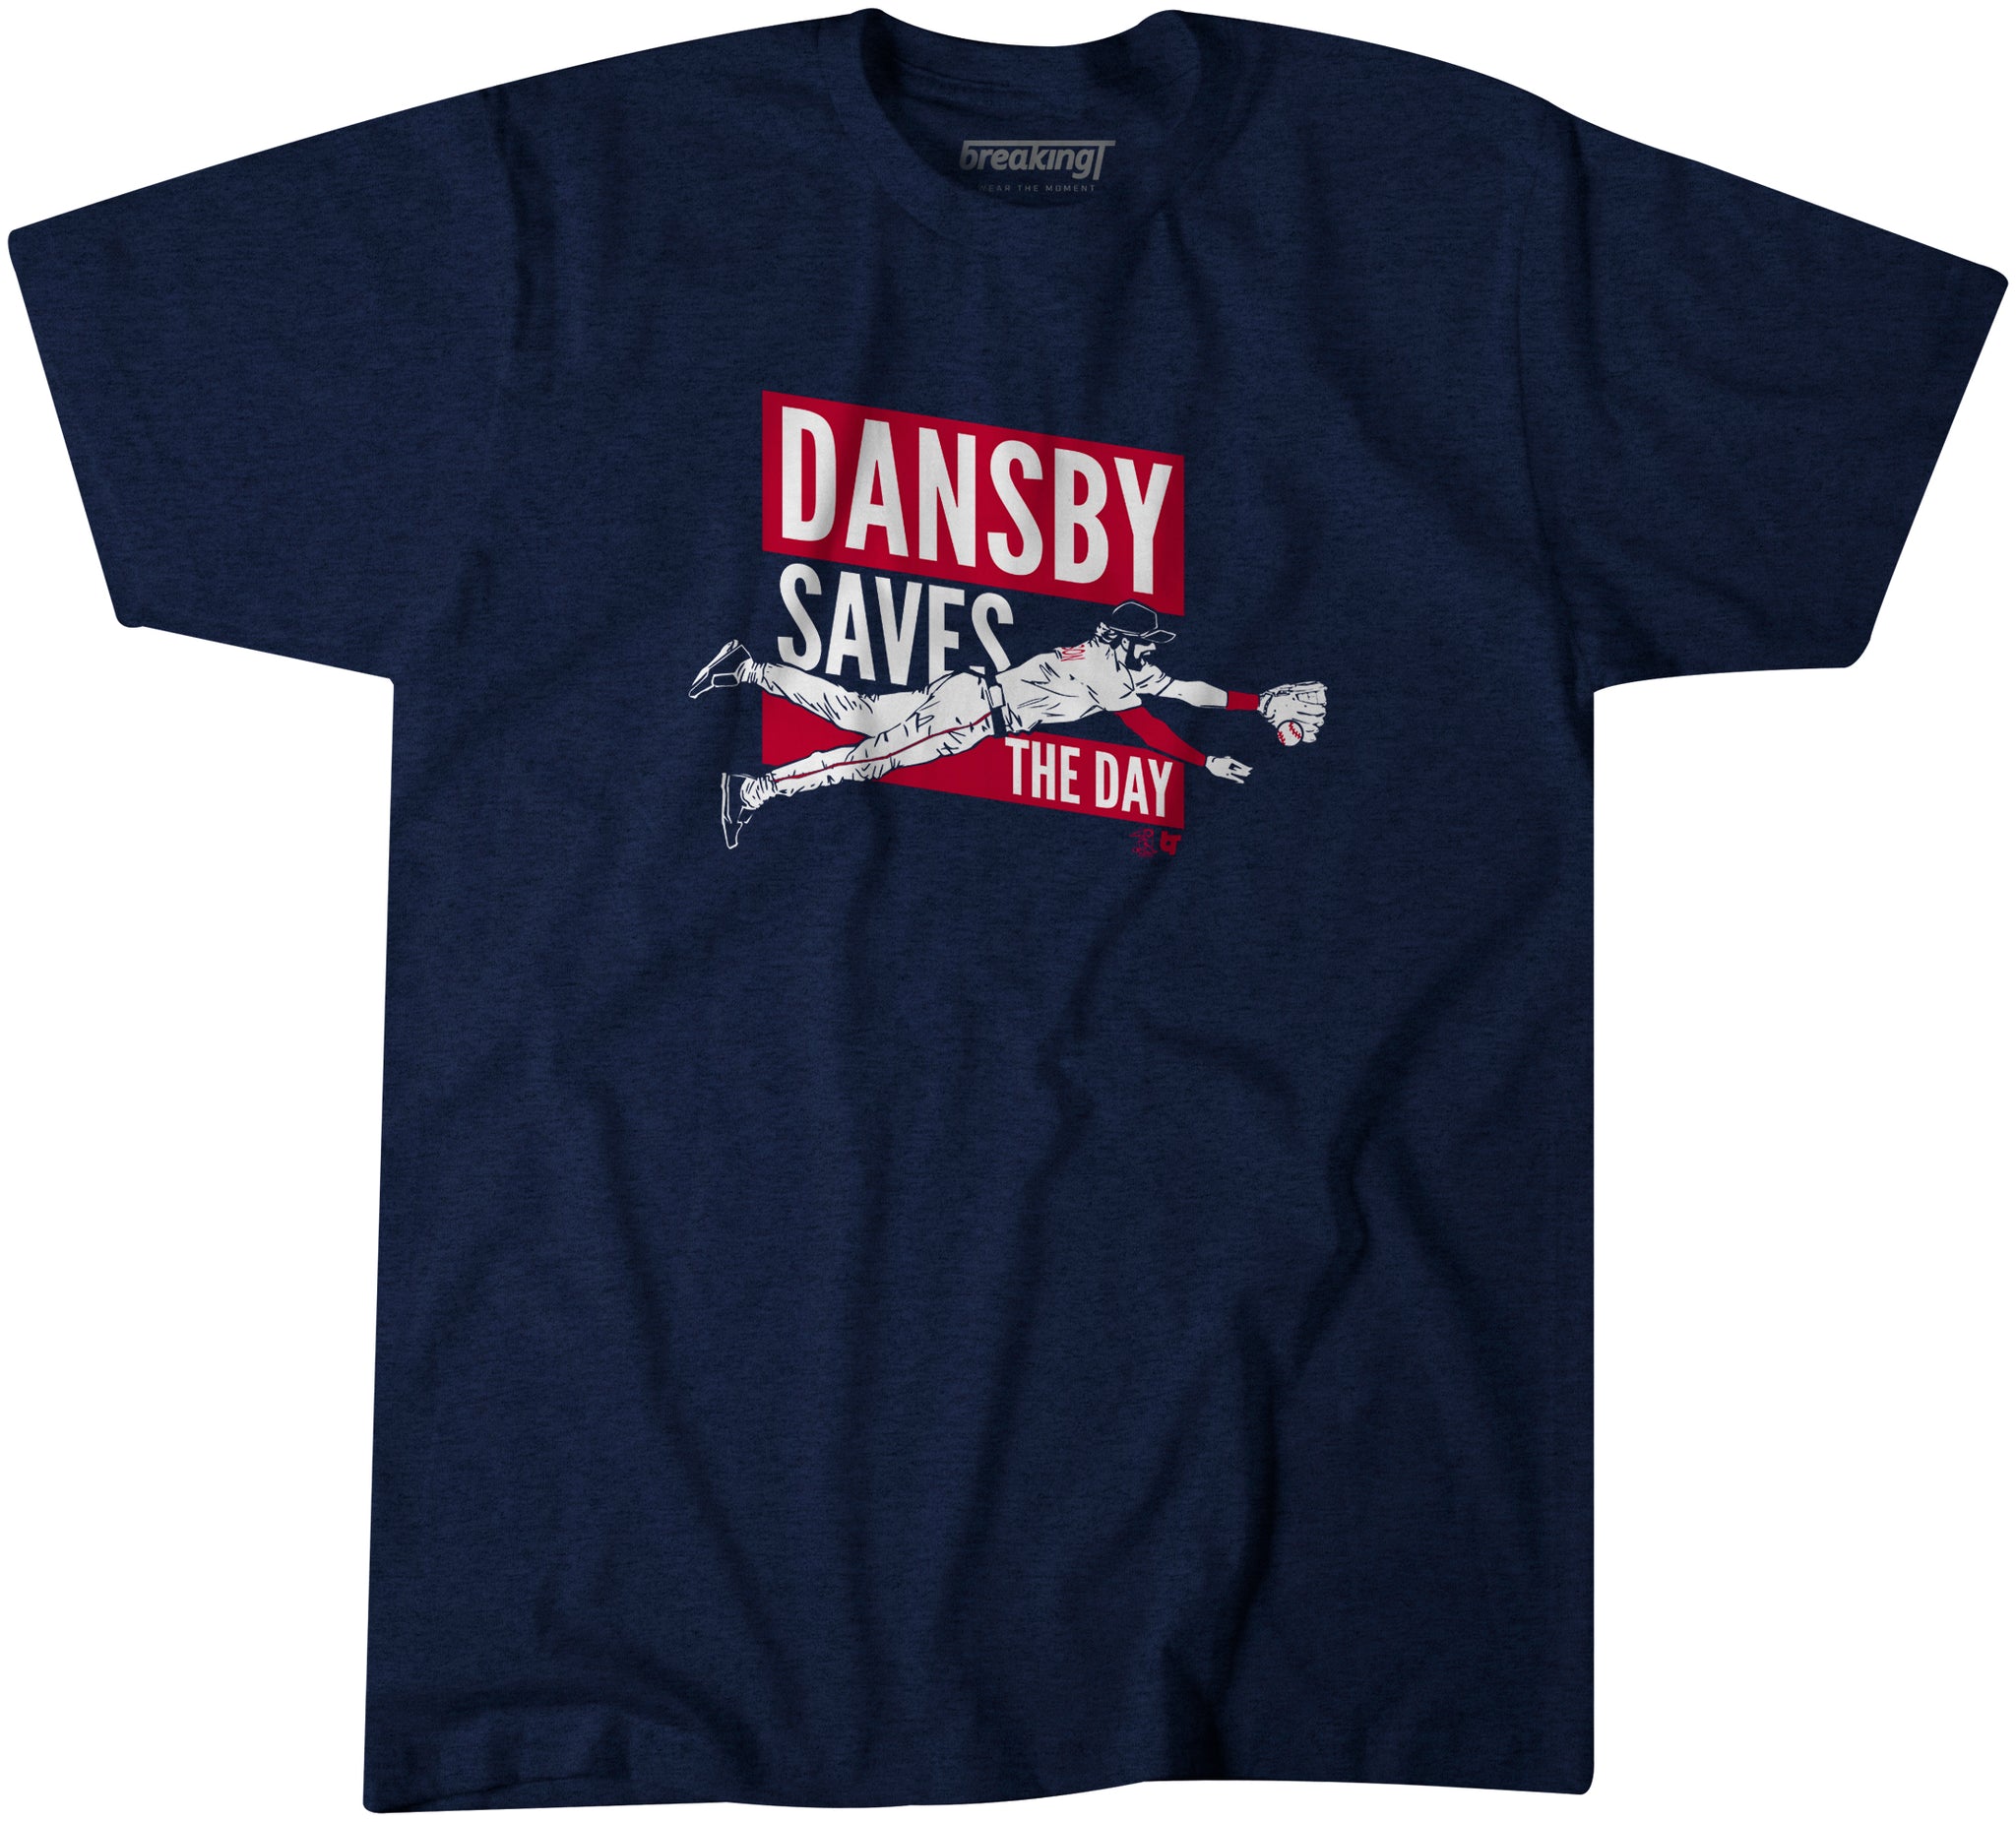 dansby swanson shirt